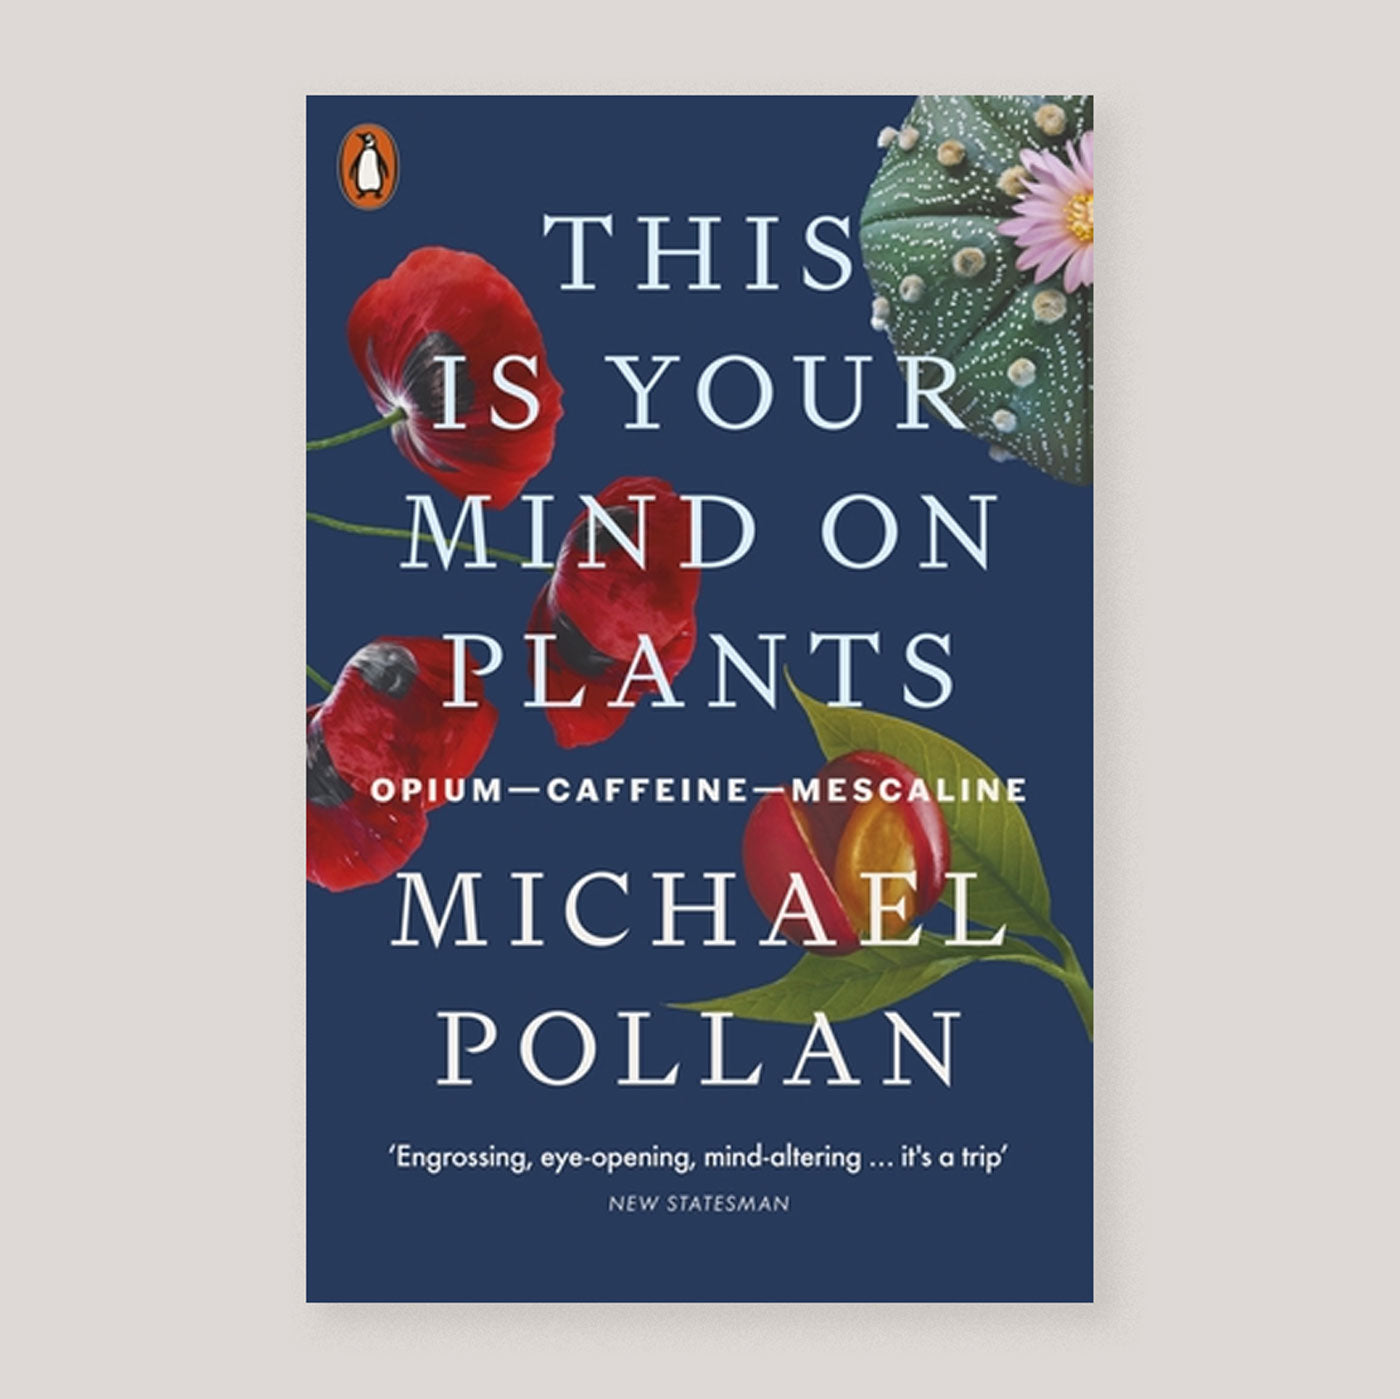 This Is Your Mind On Plants | Michael Pollan